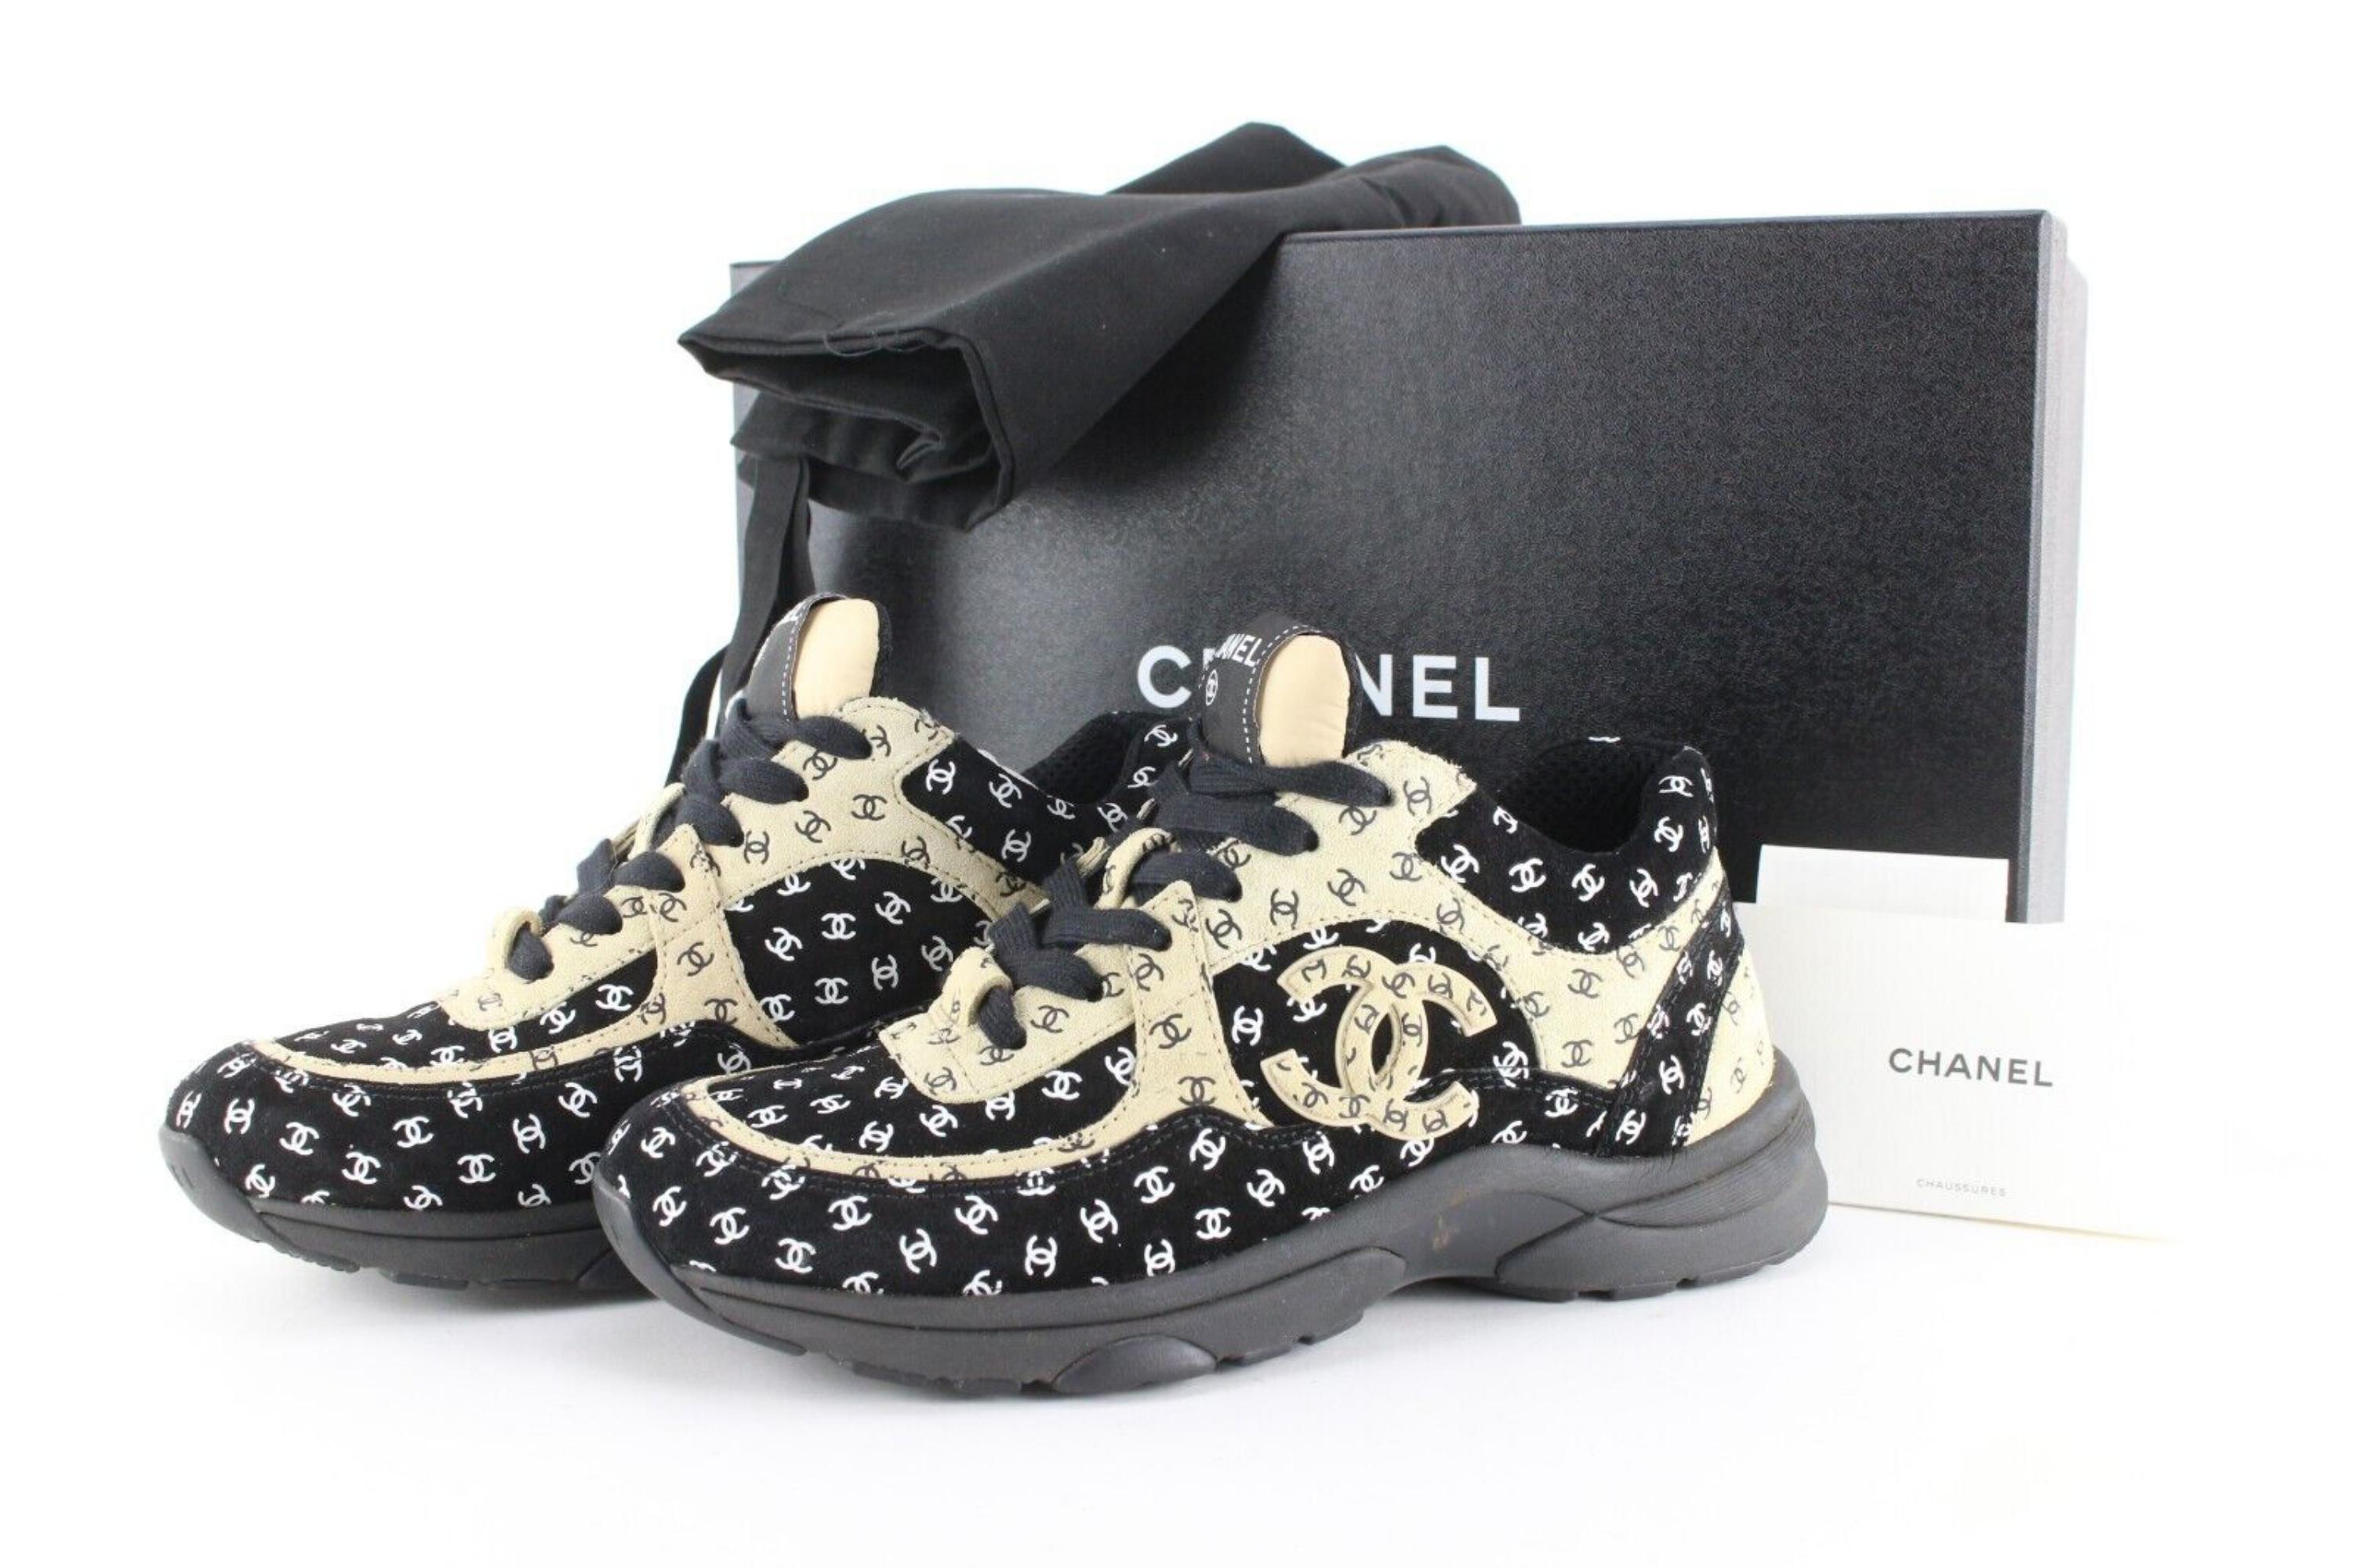 Chanel Women's 36 Light Brown x Black CC All Over Trainer Sneaker 1CJ0106

Date Code/Serial Number: W G39230

Made In: Italy

Measurements: Length:  10